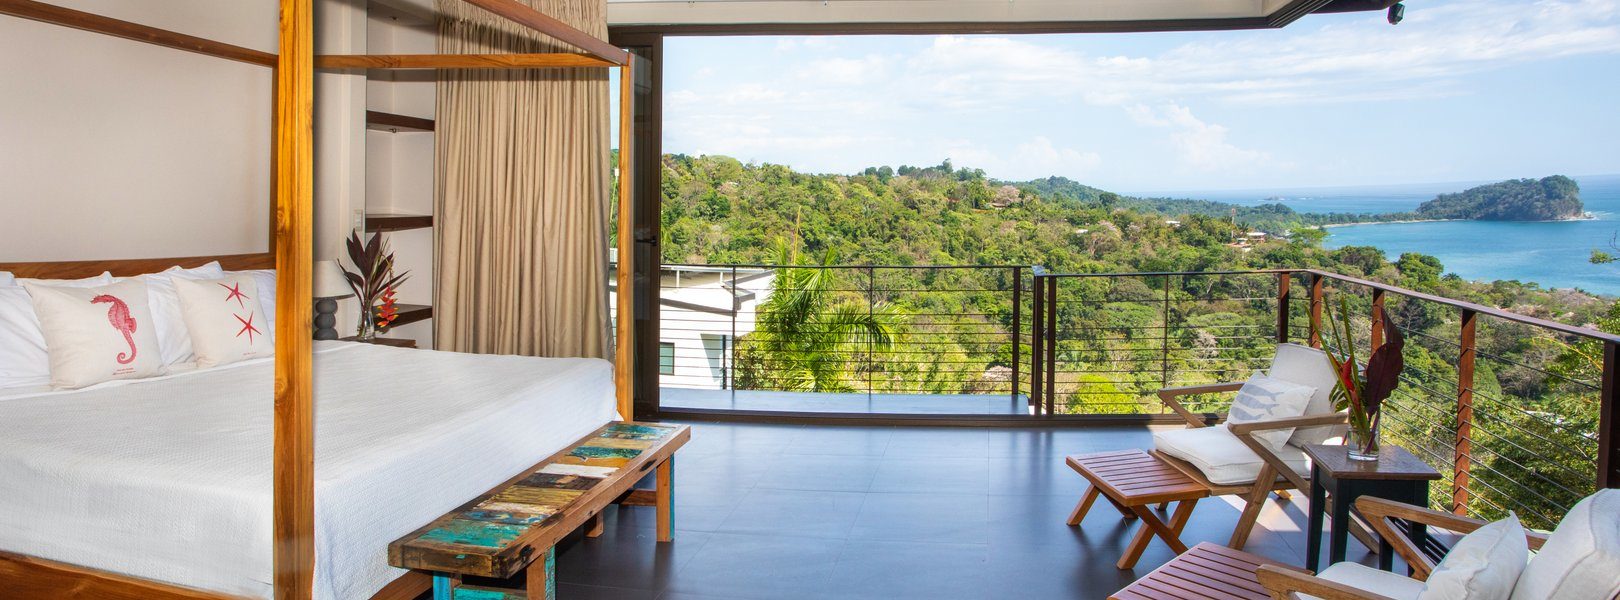 The "Sky-Suite" on the top level can be opened up to enjoy the natural surroundings of Manuel Antonio